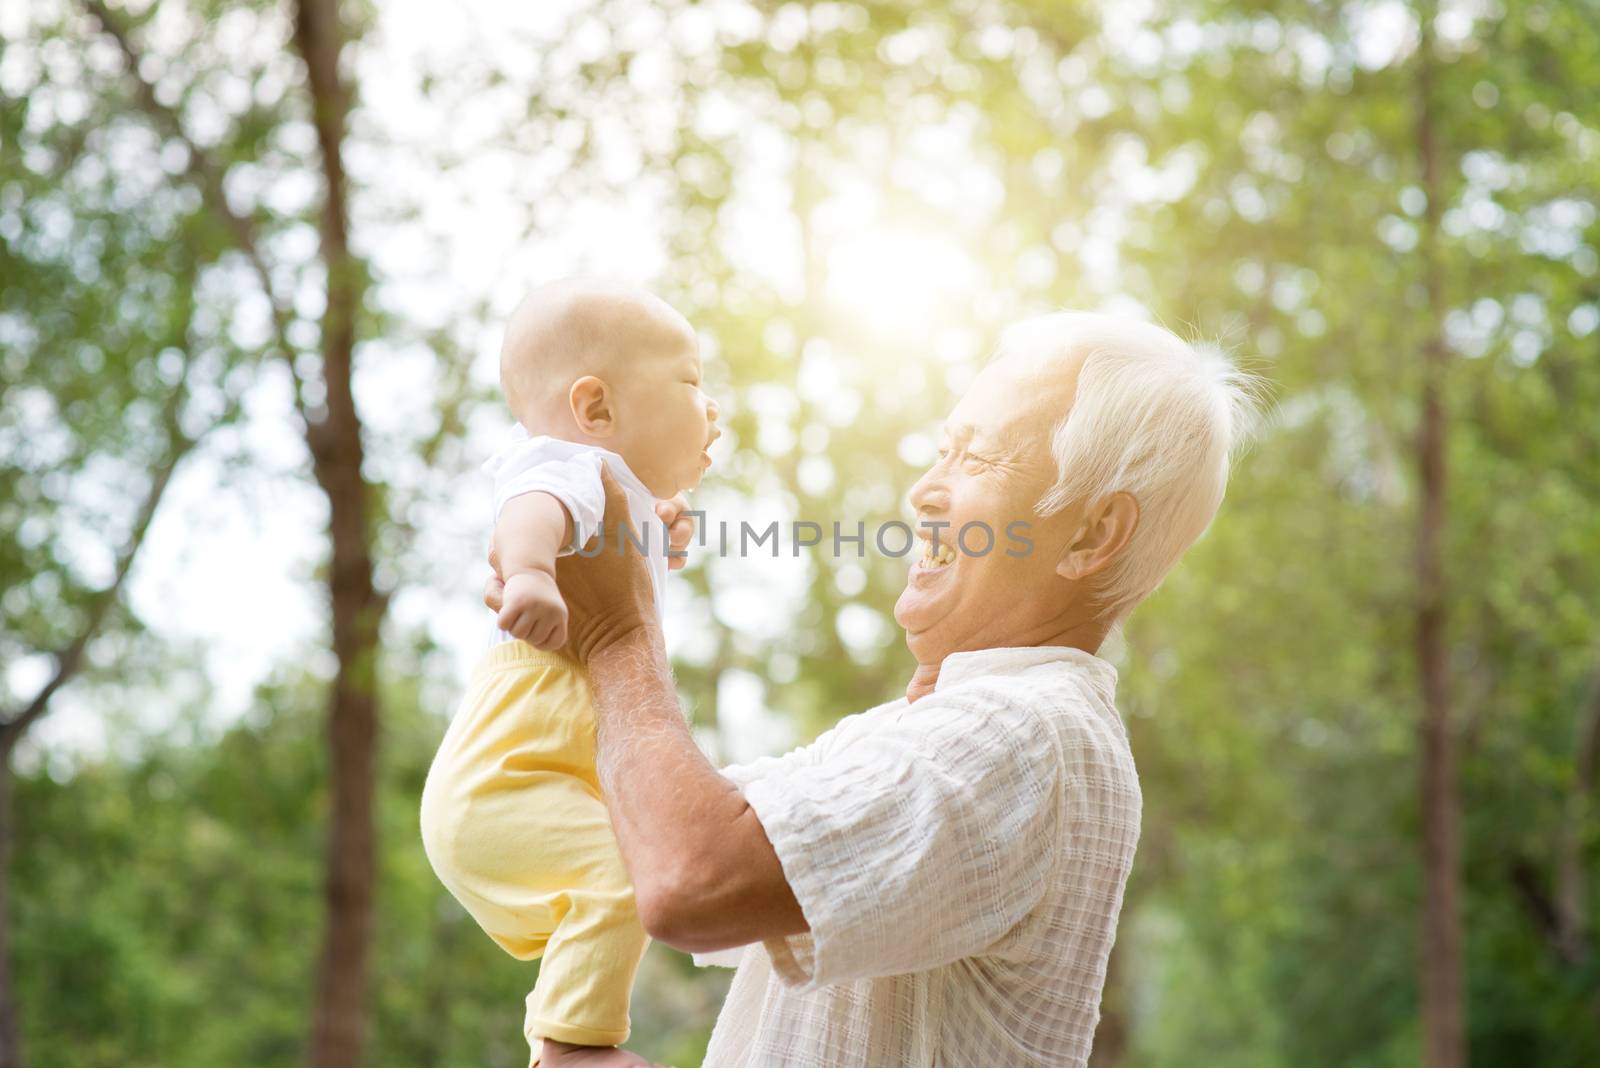 Baby grandson and grandfather having fun outdoors. Asian family, life insurance concept.